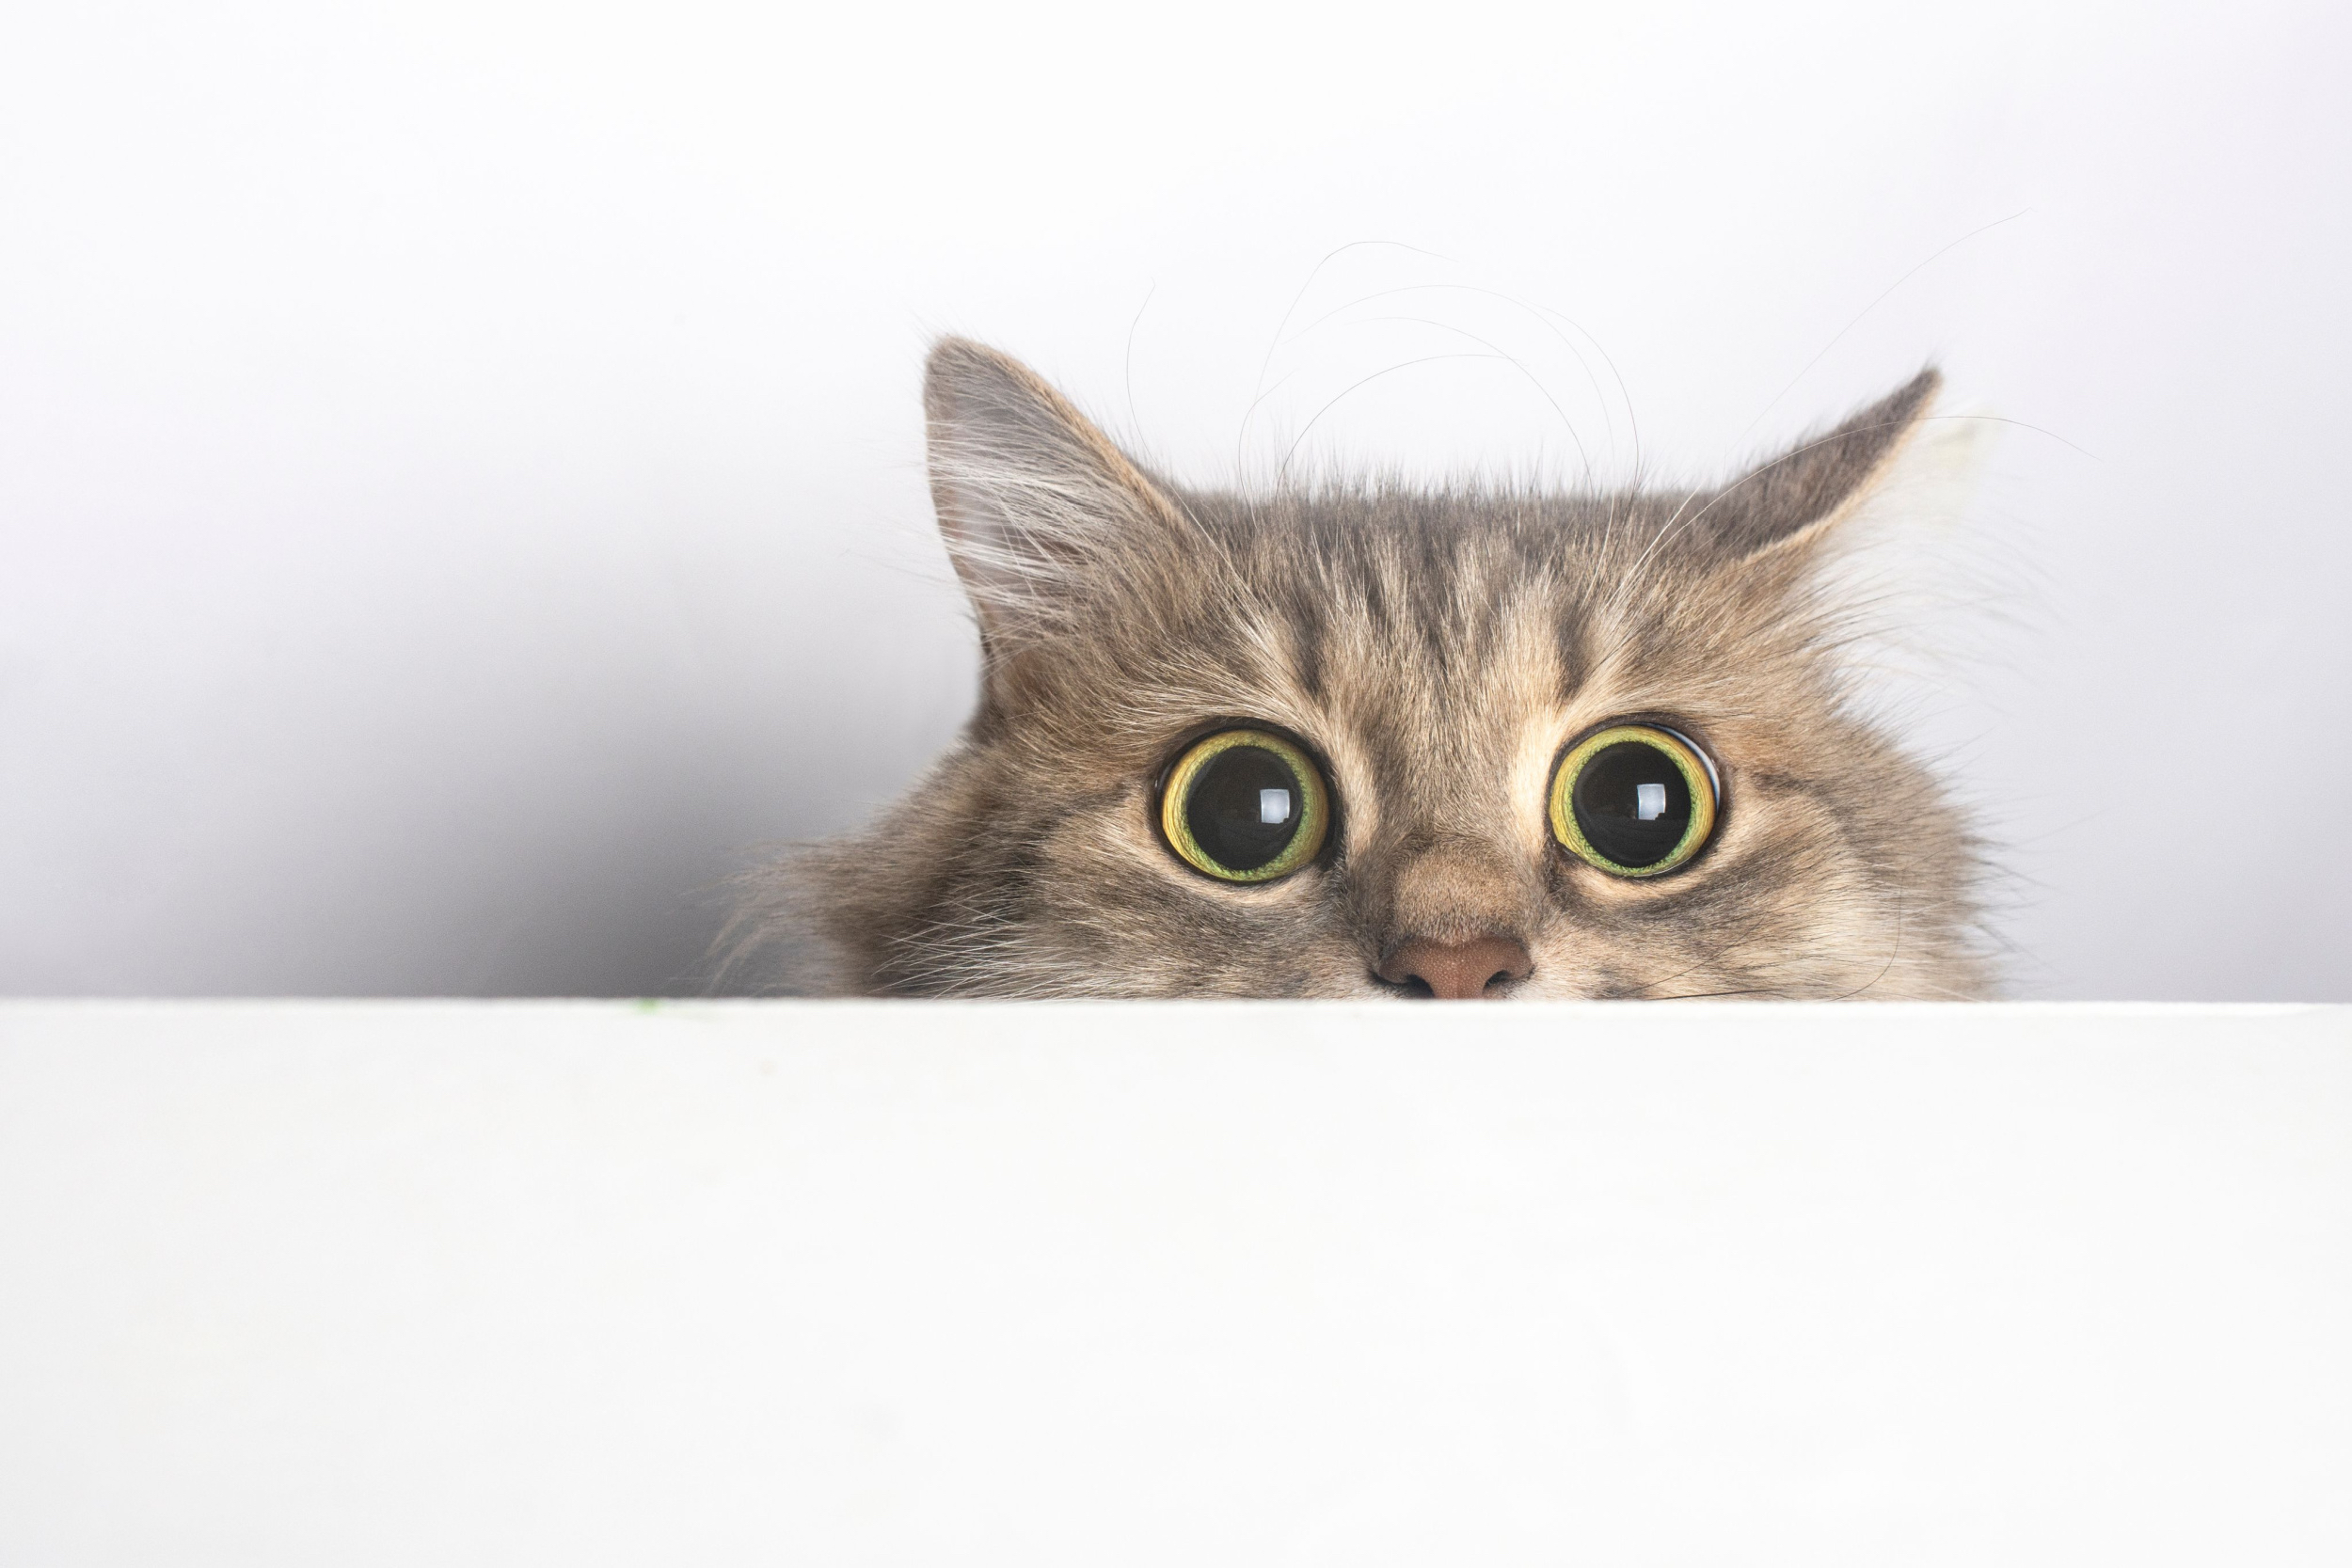 JITTERY KITTIES GETTING SPOOKED – SCAREDY CATS ARE JUST TOO SILLY! ﻿